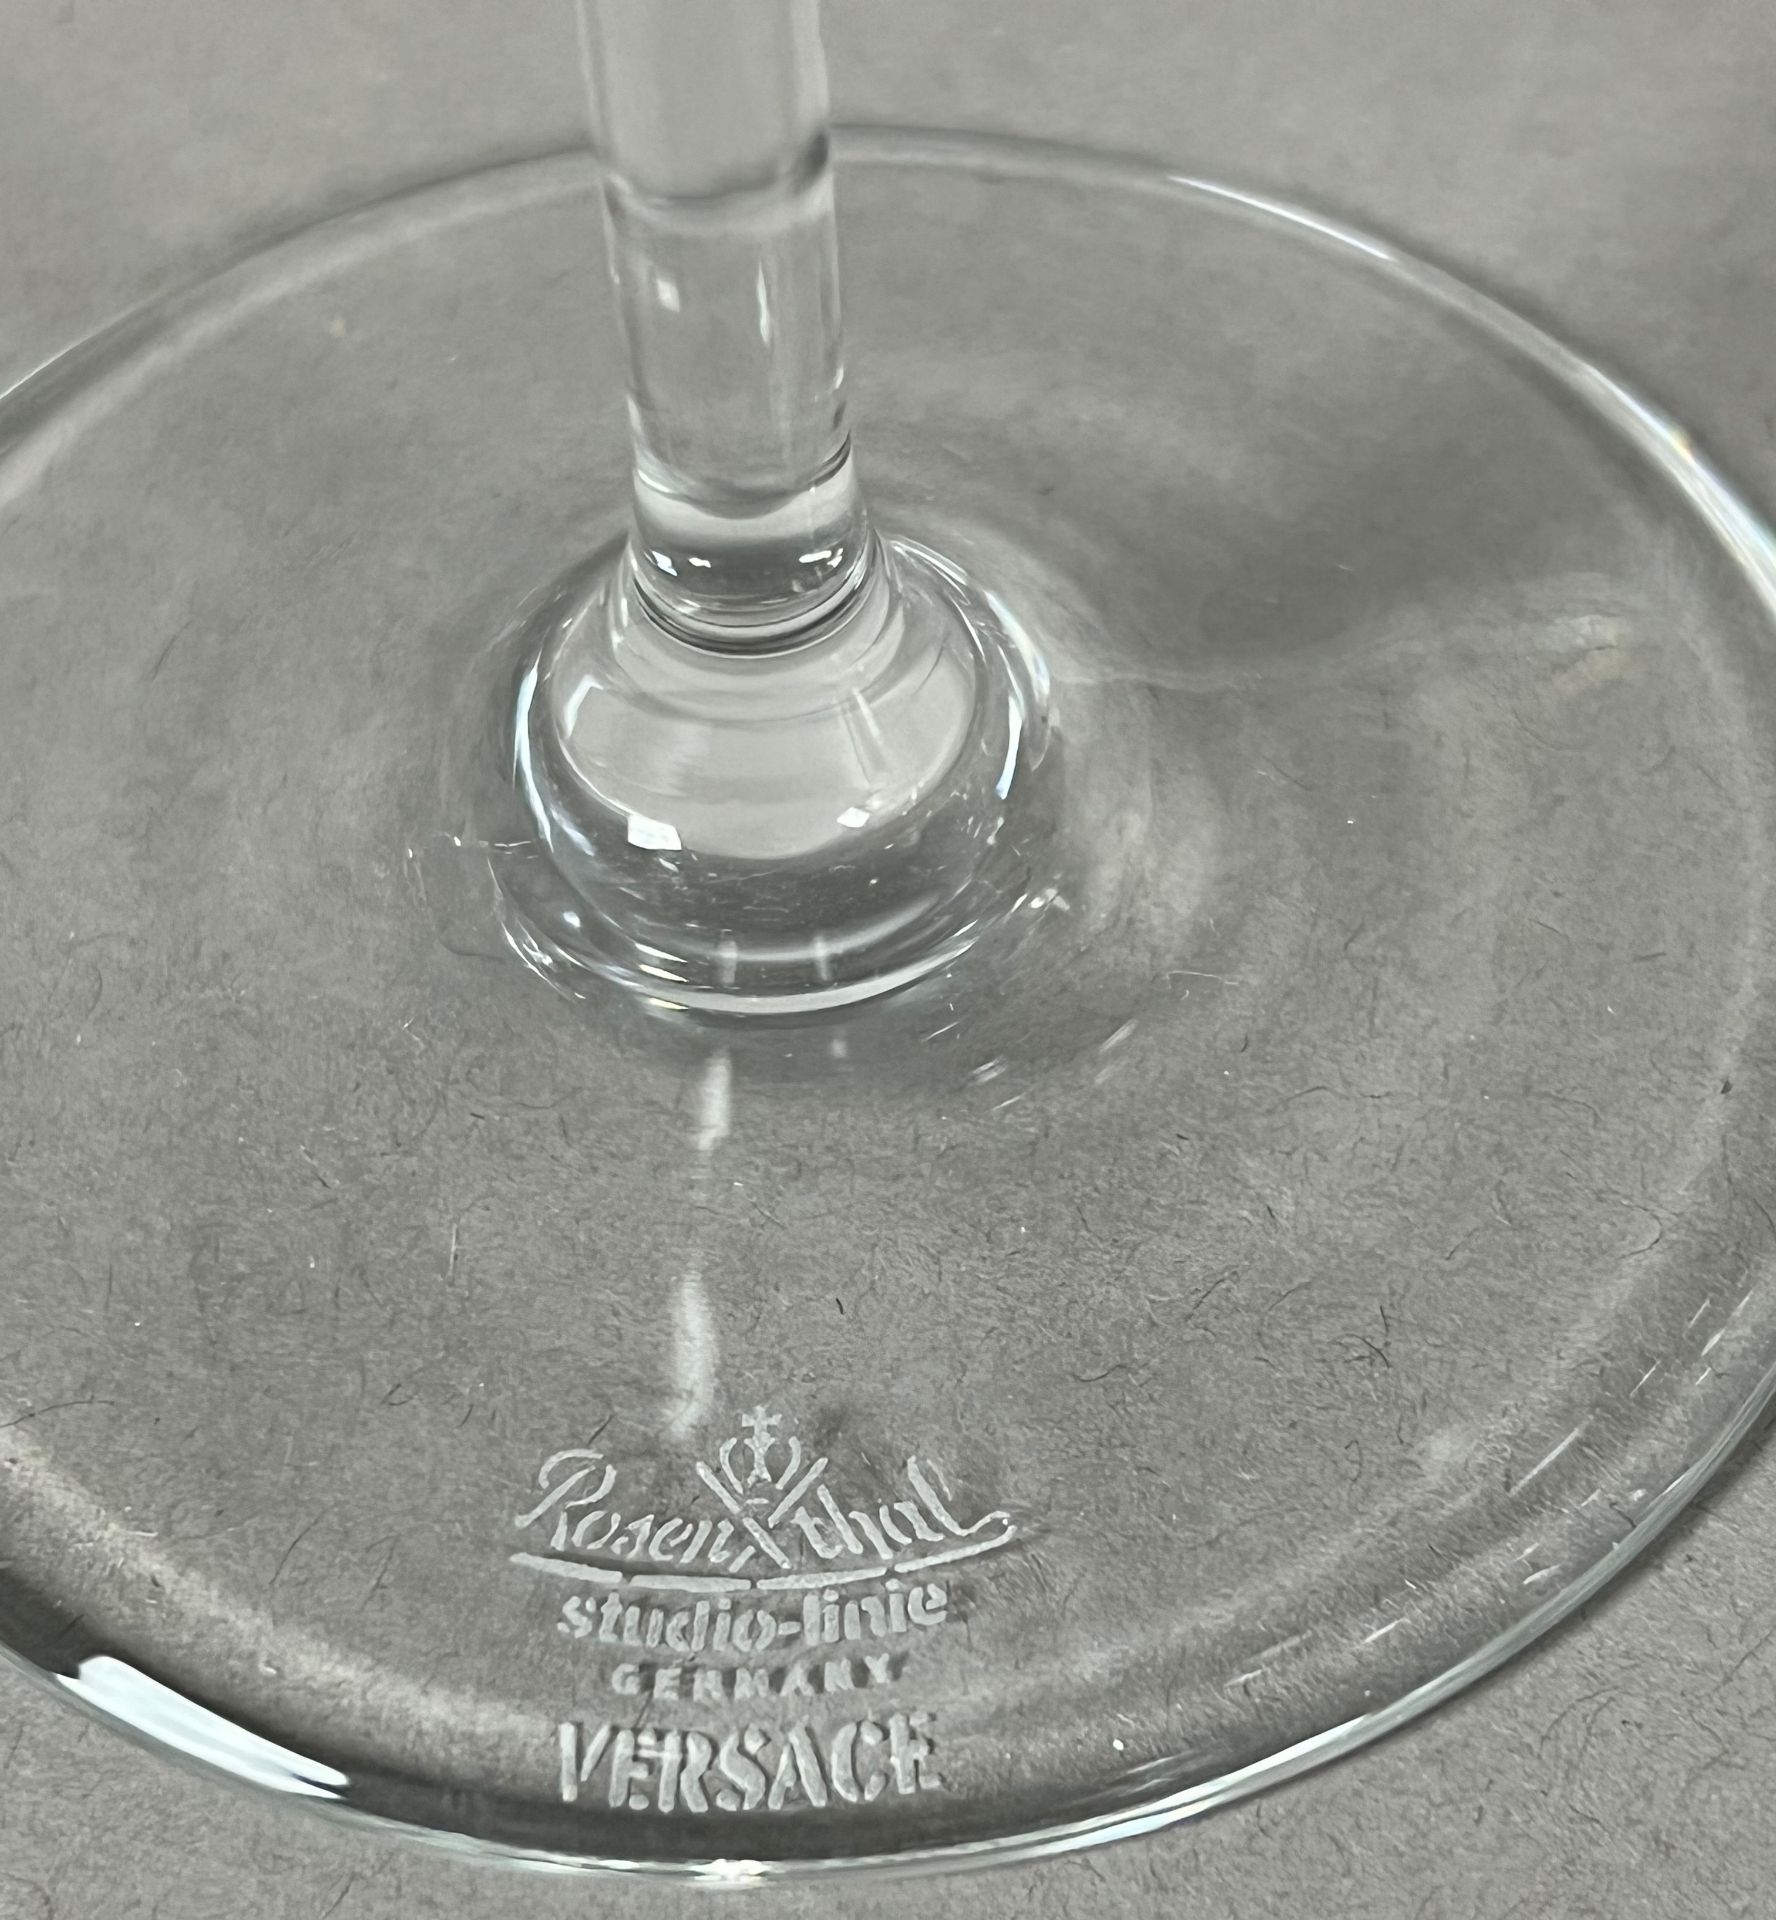 VERSACE by ROSENTHAL. "Medusa Lumiere". 6-piece set of wine glasses. - Image 8 of 8